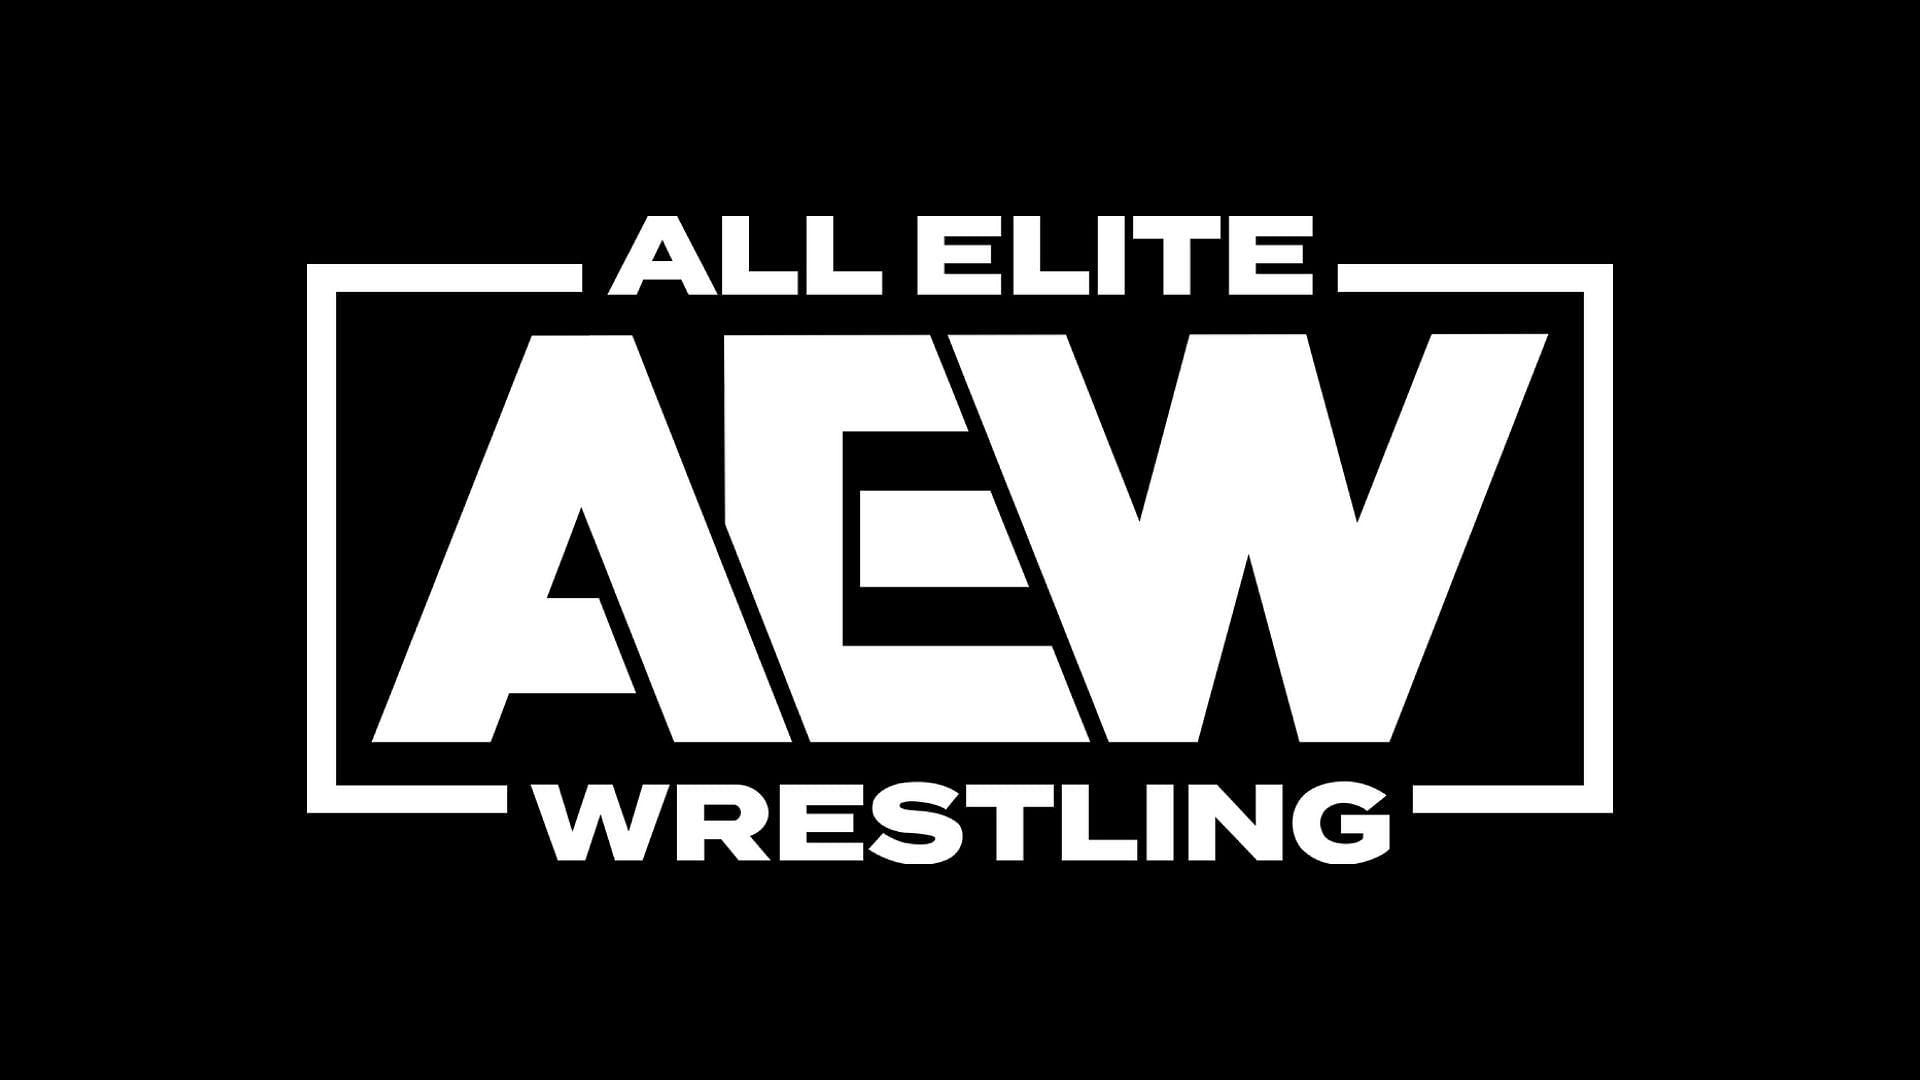 Could this new look hint at a return to AEW?